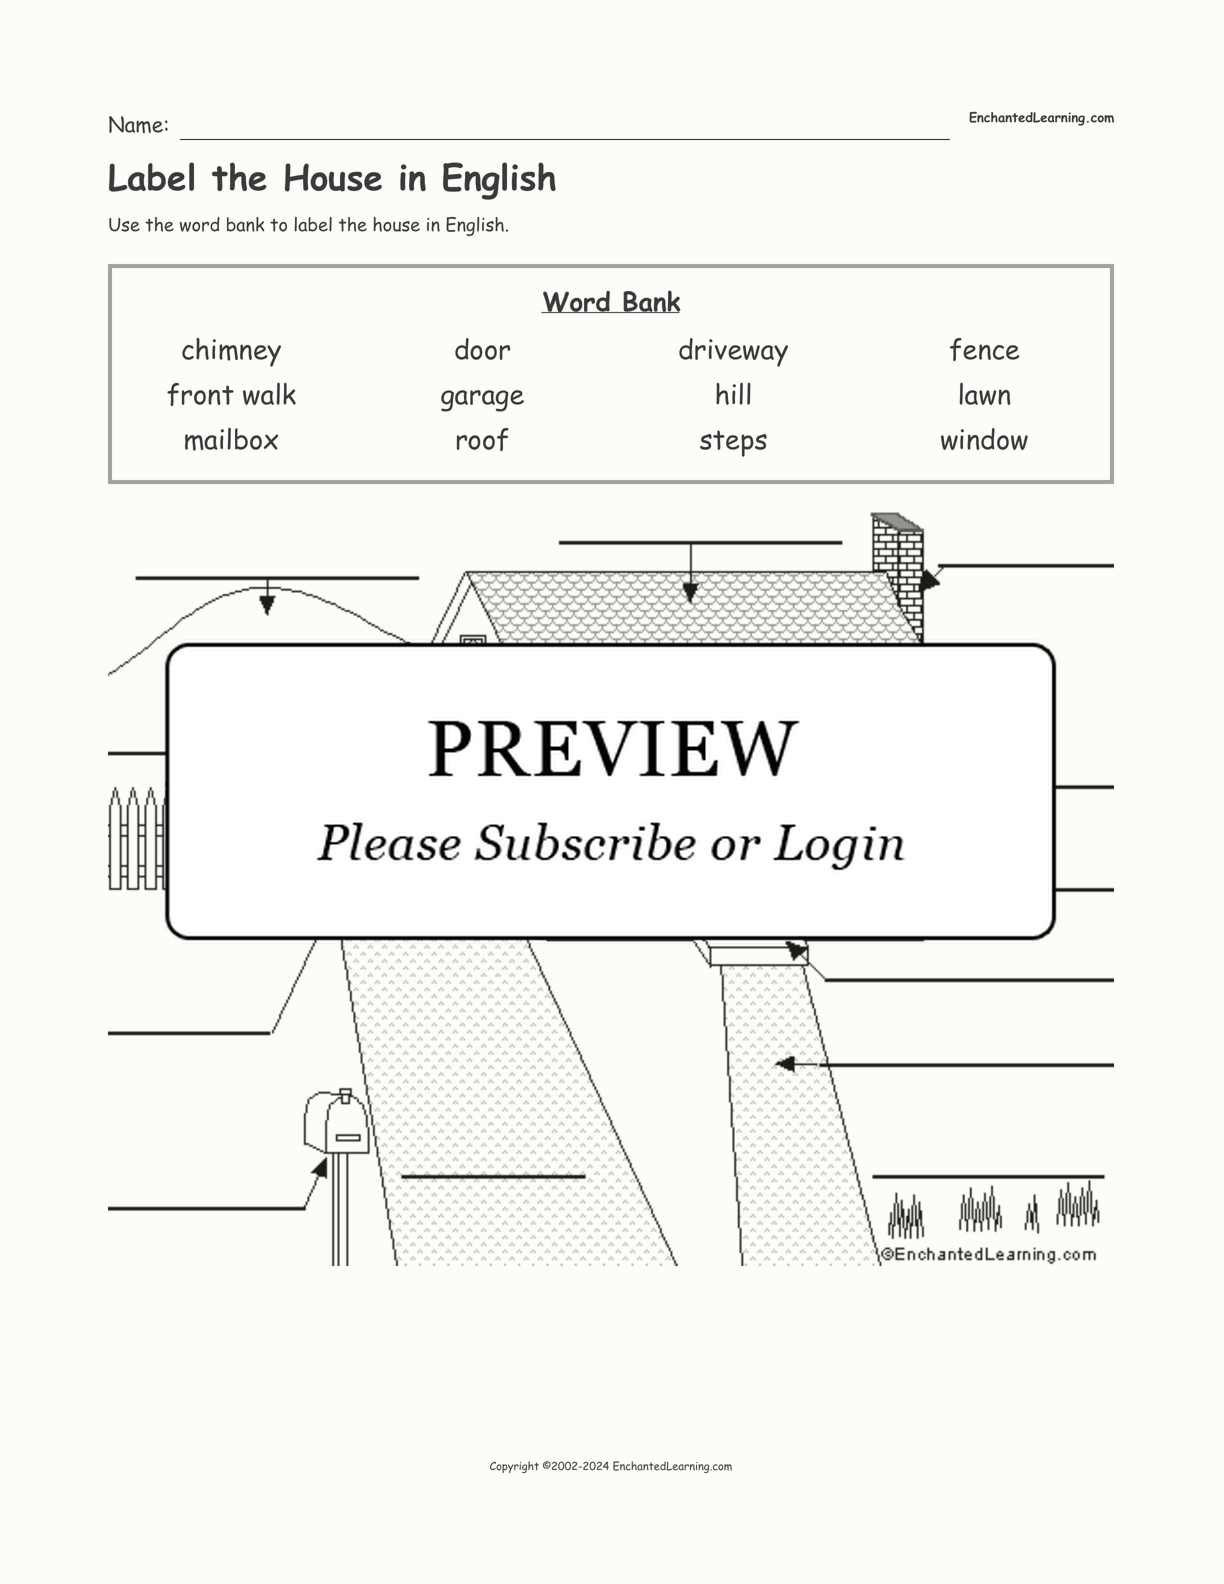 Label the House in English interactive worksheet page 1